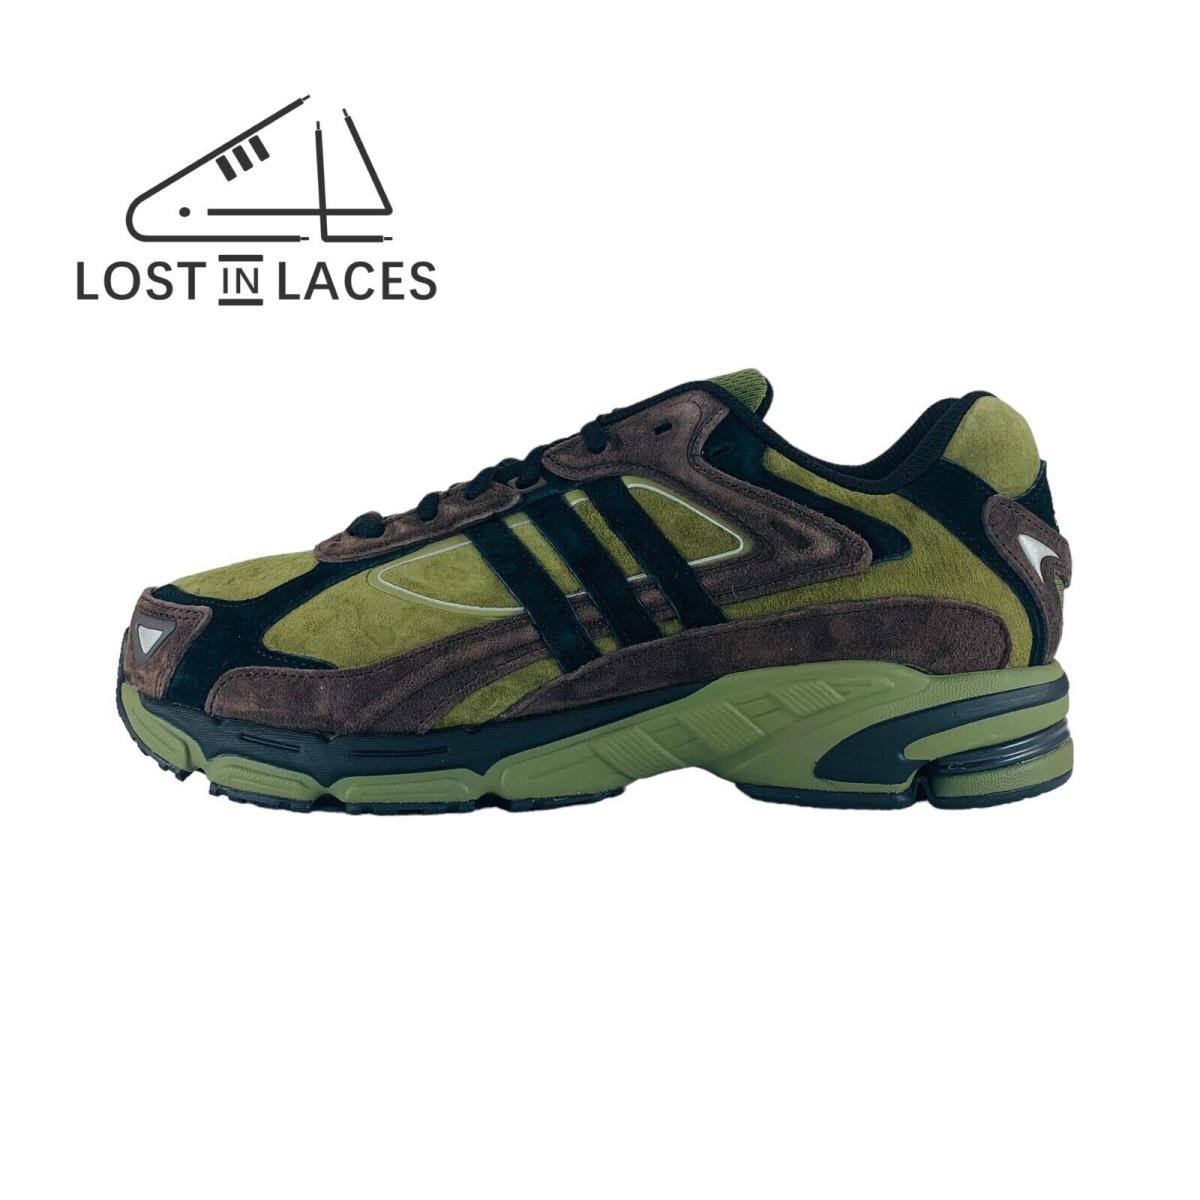 Adidas Response CL Focus Olive Sneakers Men`s Shoes ID0354 - Green